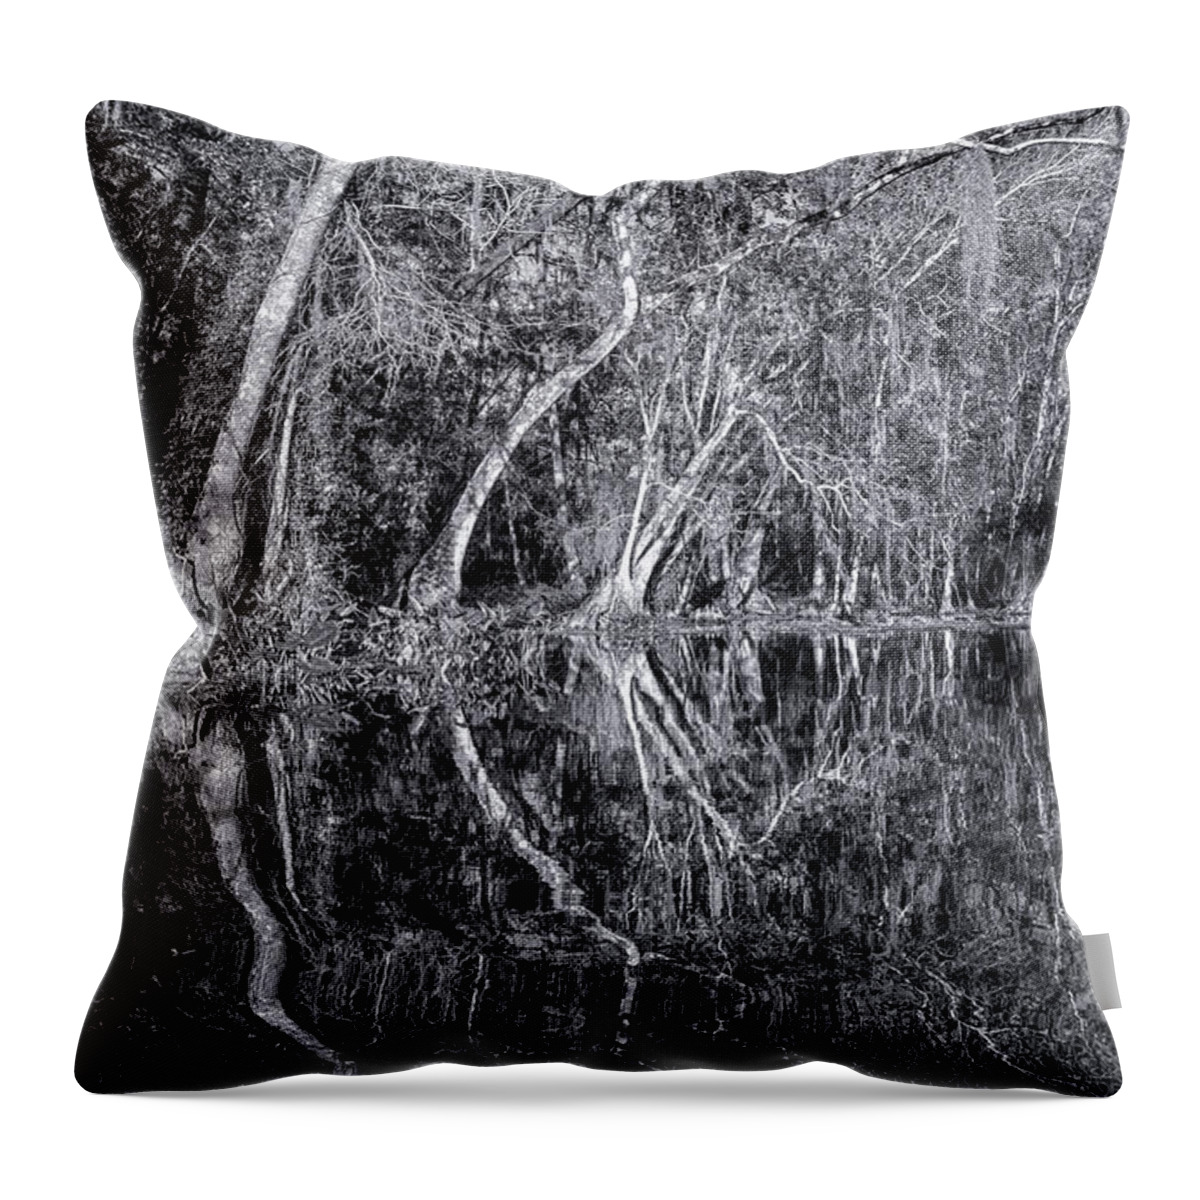 Sherry Day Throw Pillow featuring the photograph Liquid Silver by Ghostwinds Photography